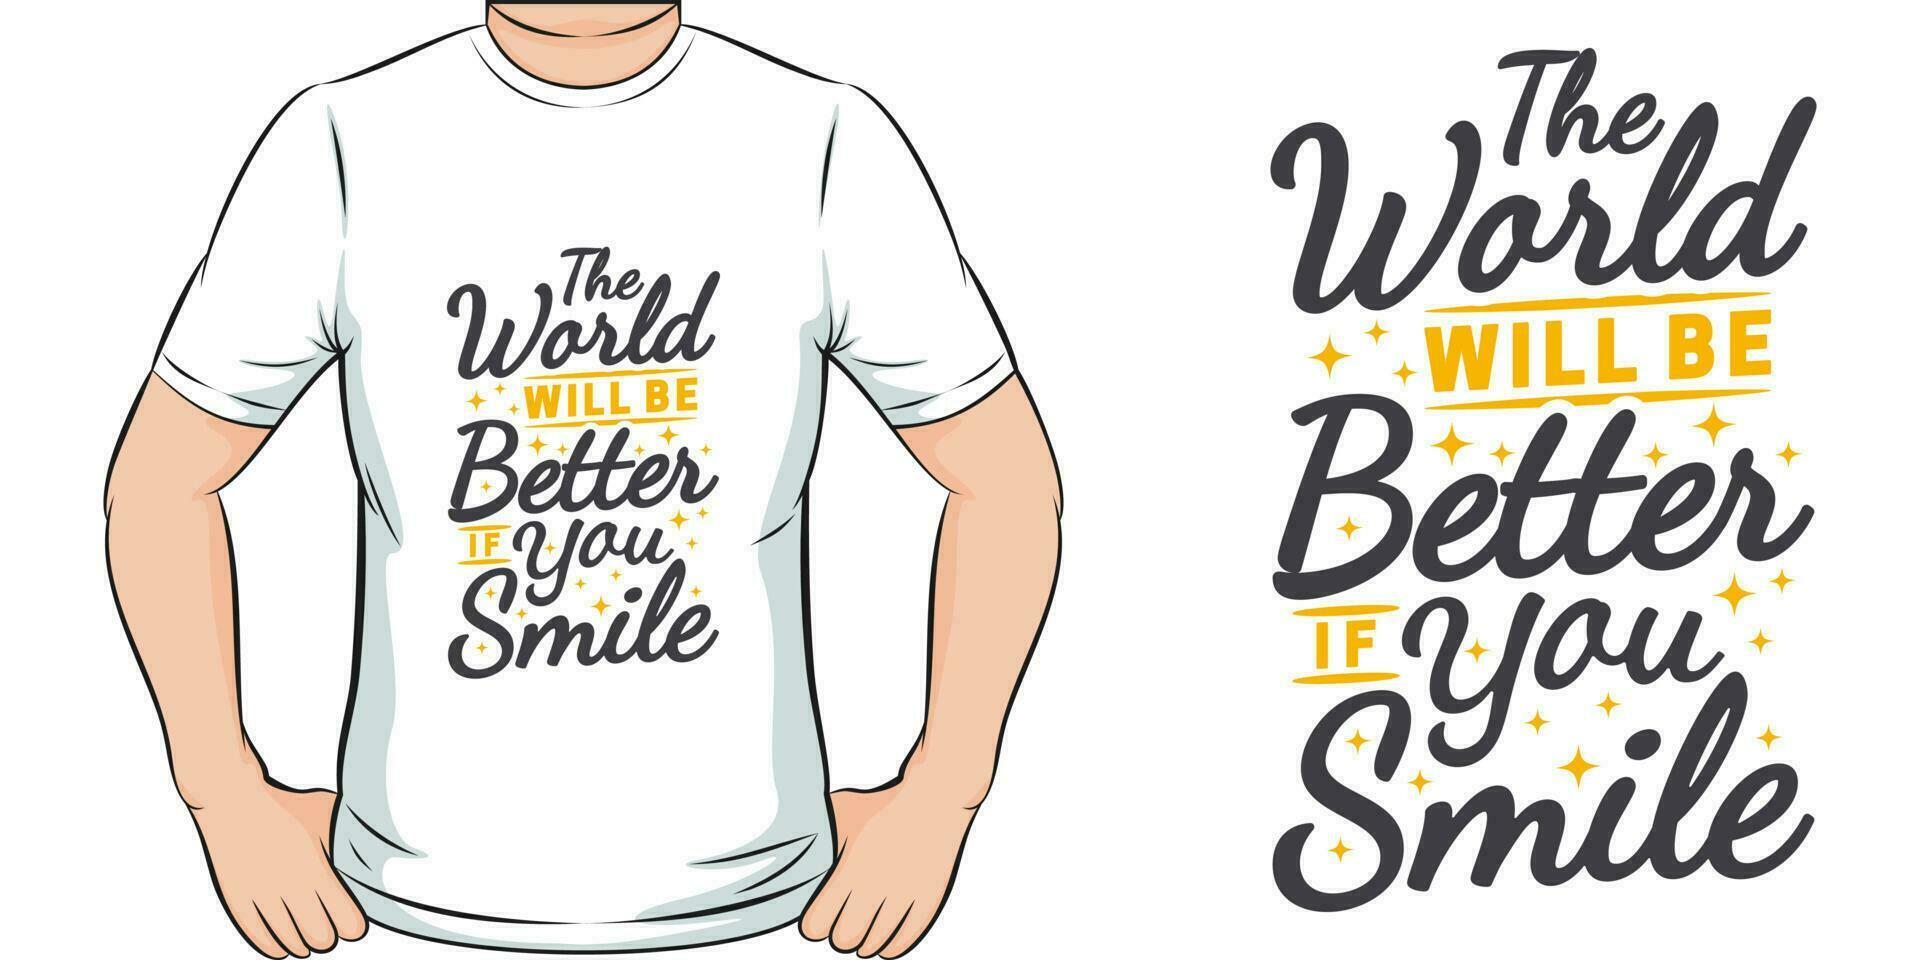 The World Will be Better If You Smile, Motivational Quote T-Shirt Design. vector